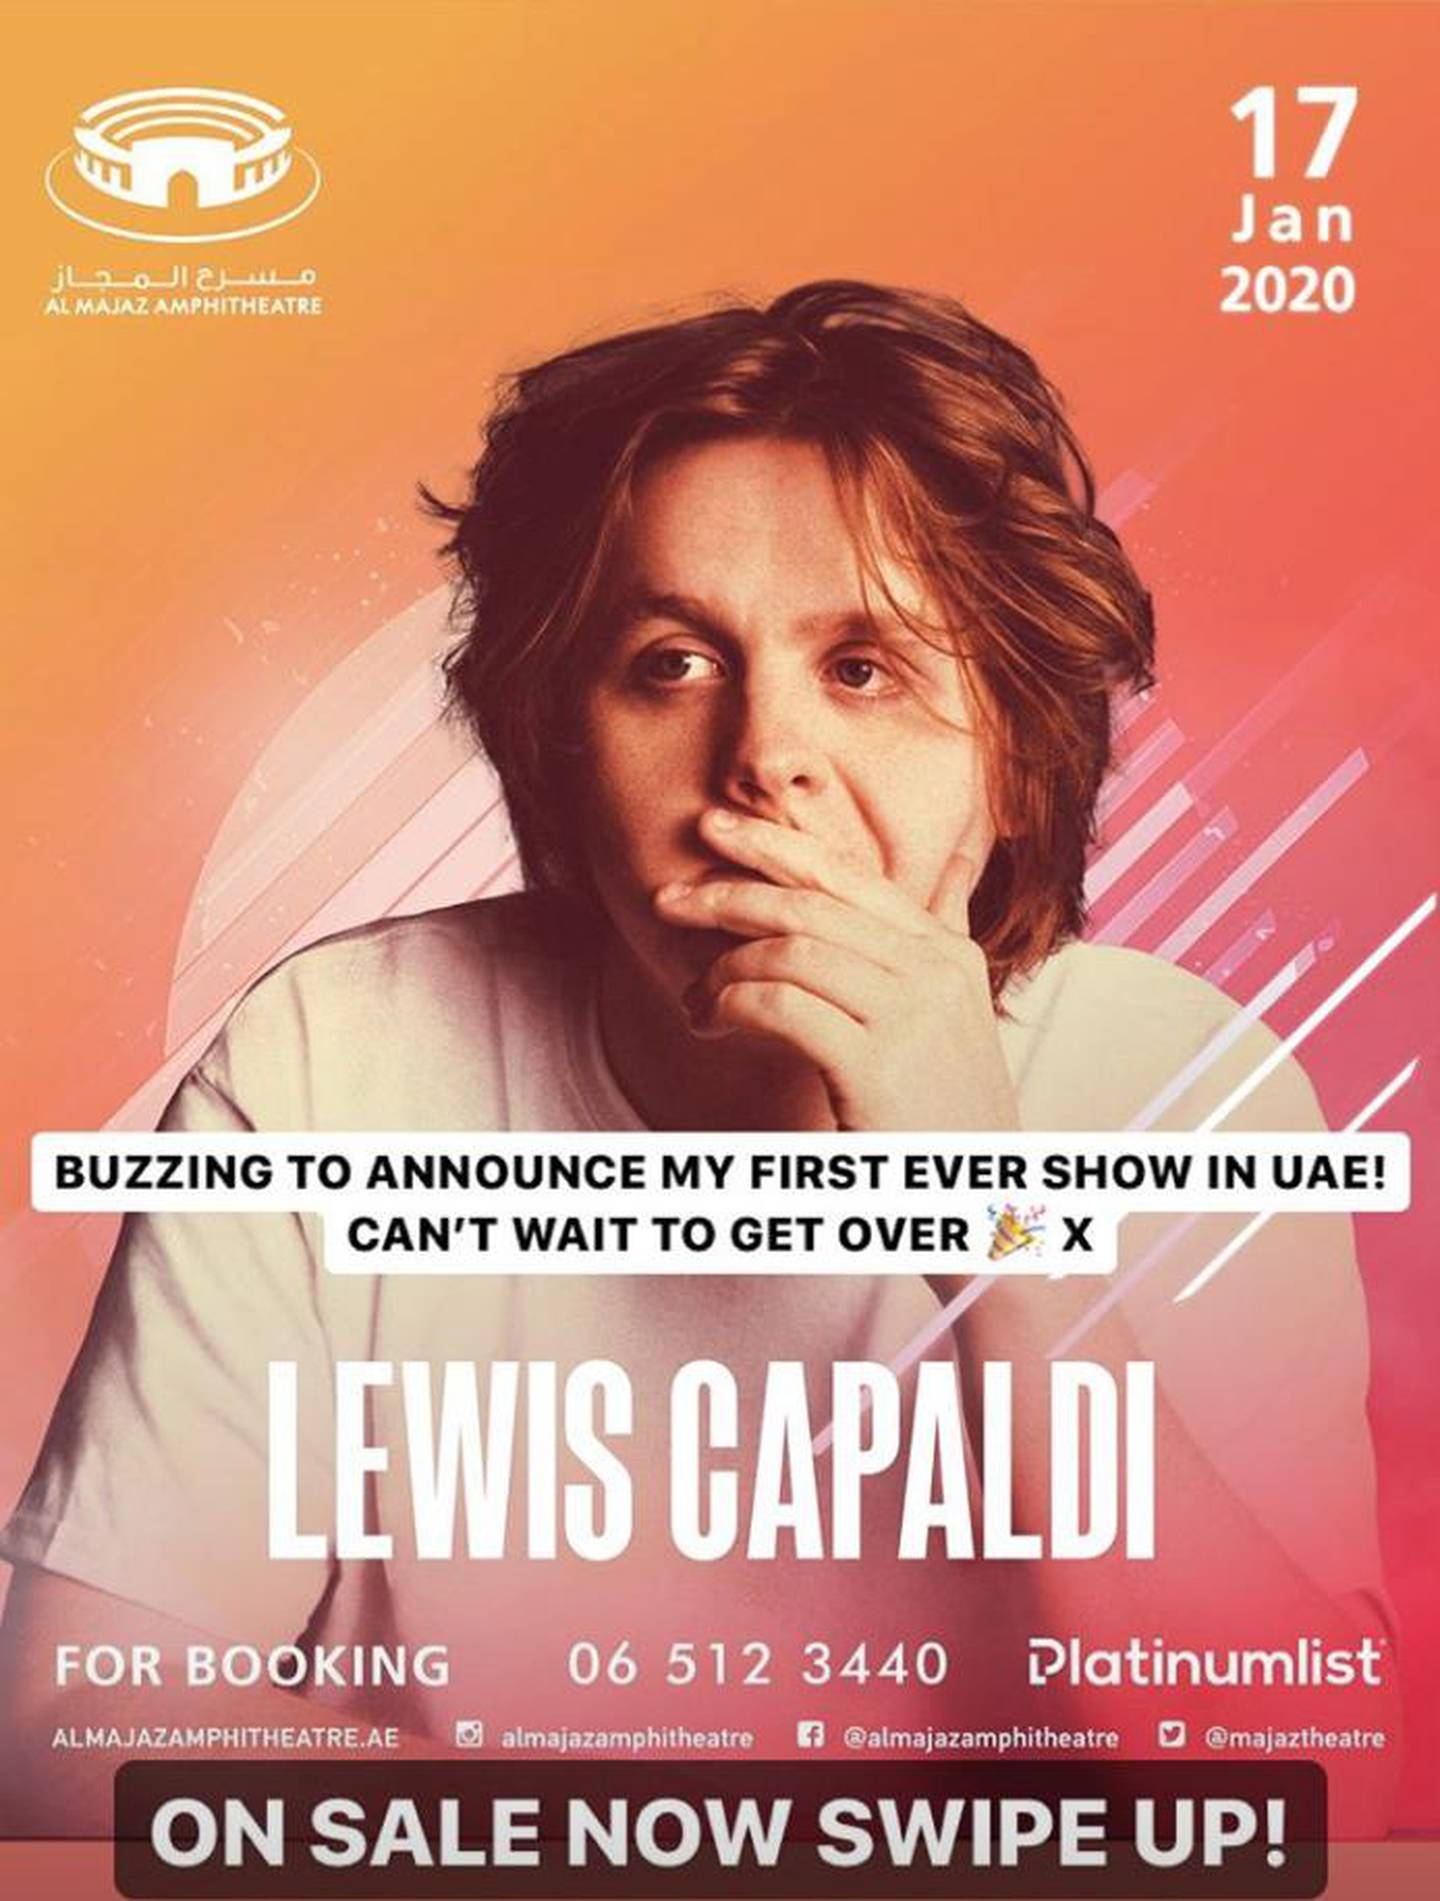 Capaldi announced the news of his UAE concert on his Instagram page. 